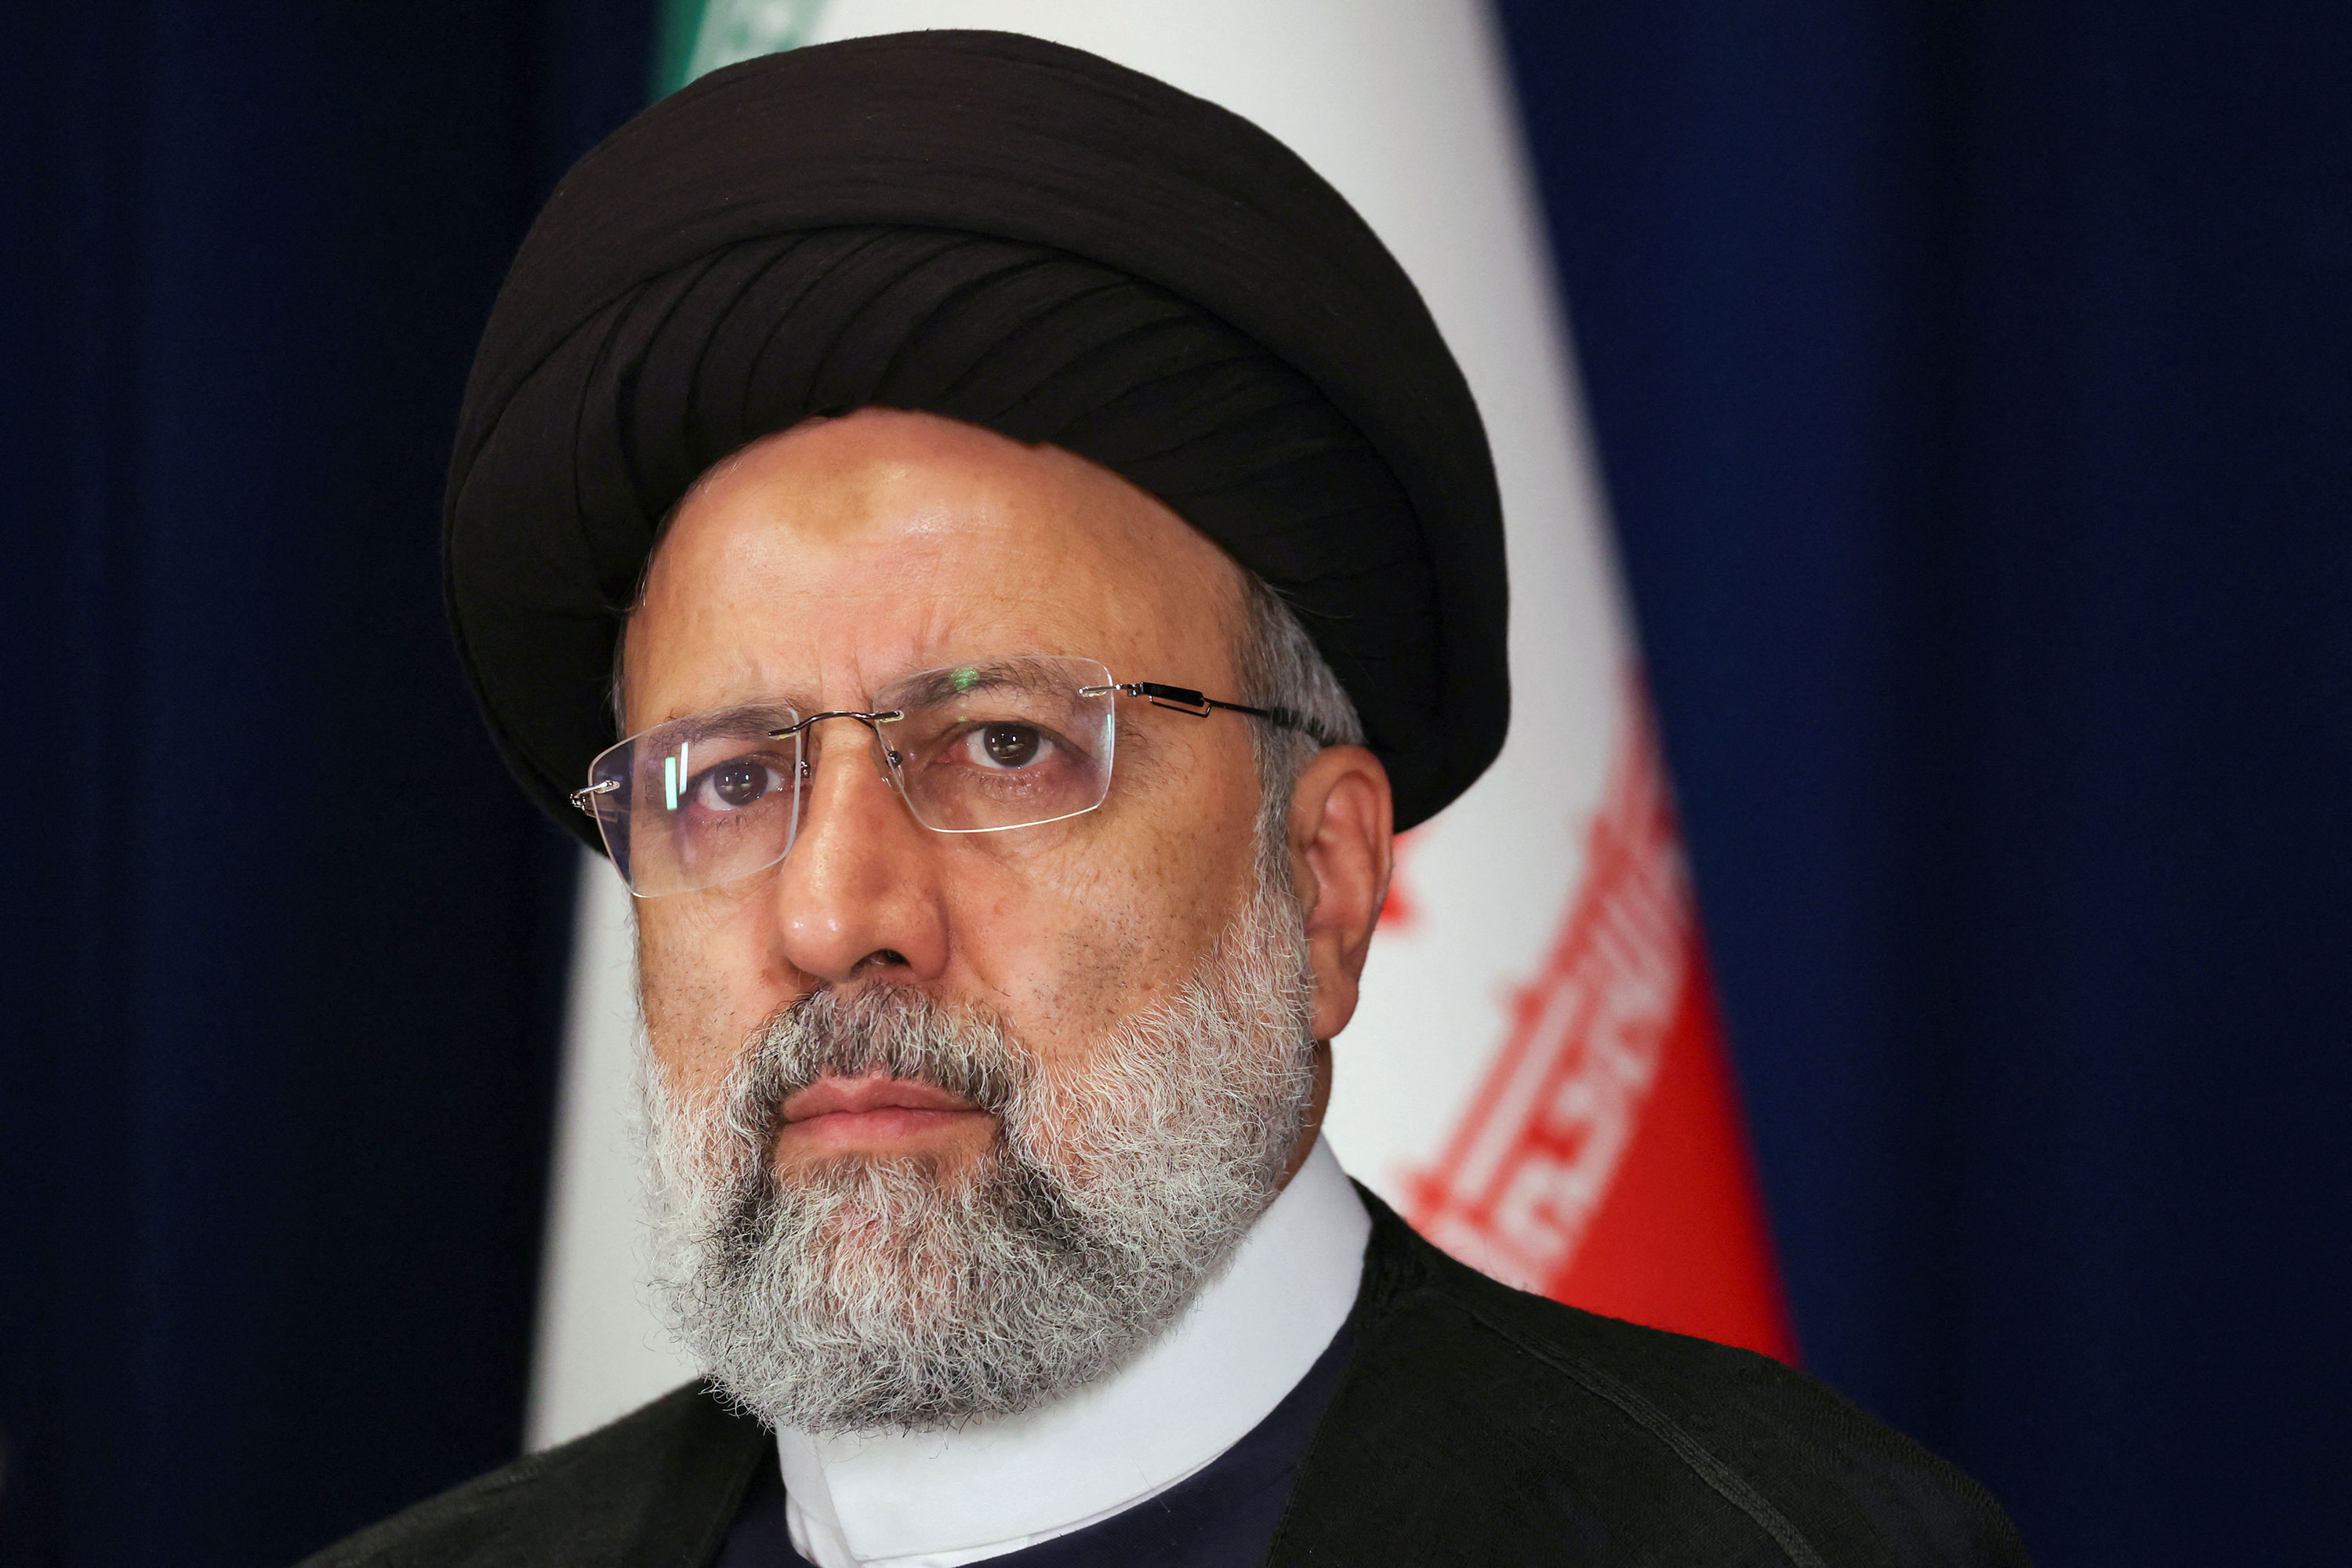 NEW OPPORTUNITY! Will Iran demand democracy and human rights after top terrorist’s death? 🌈